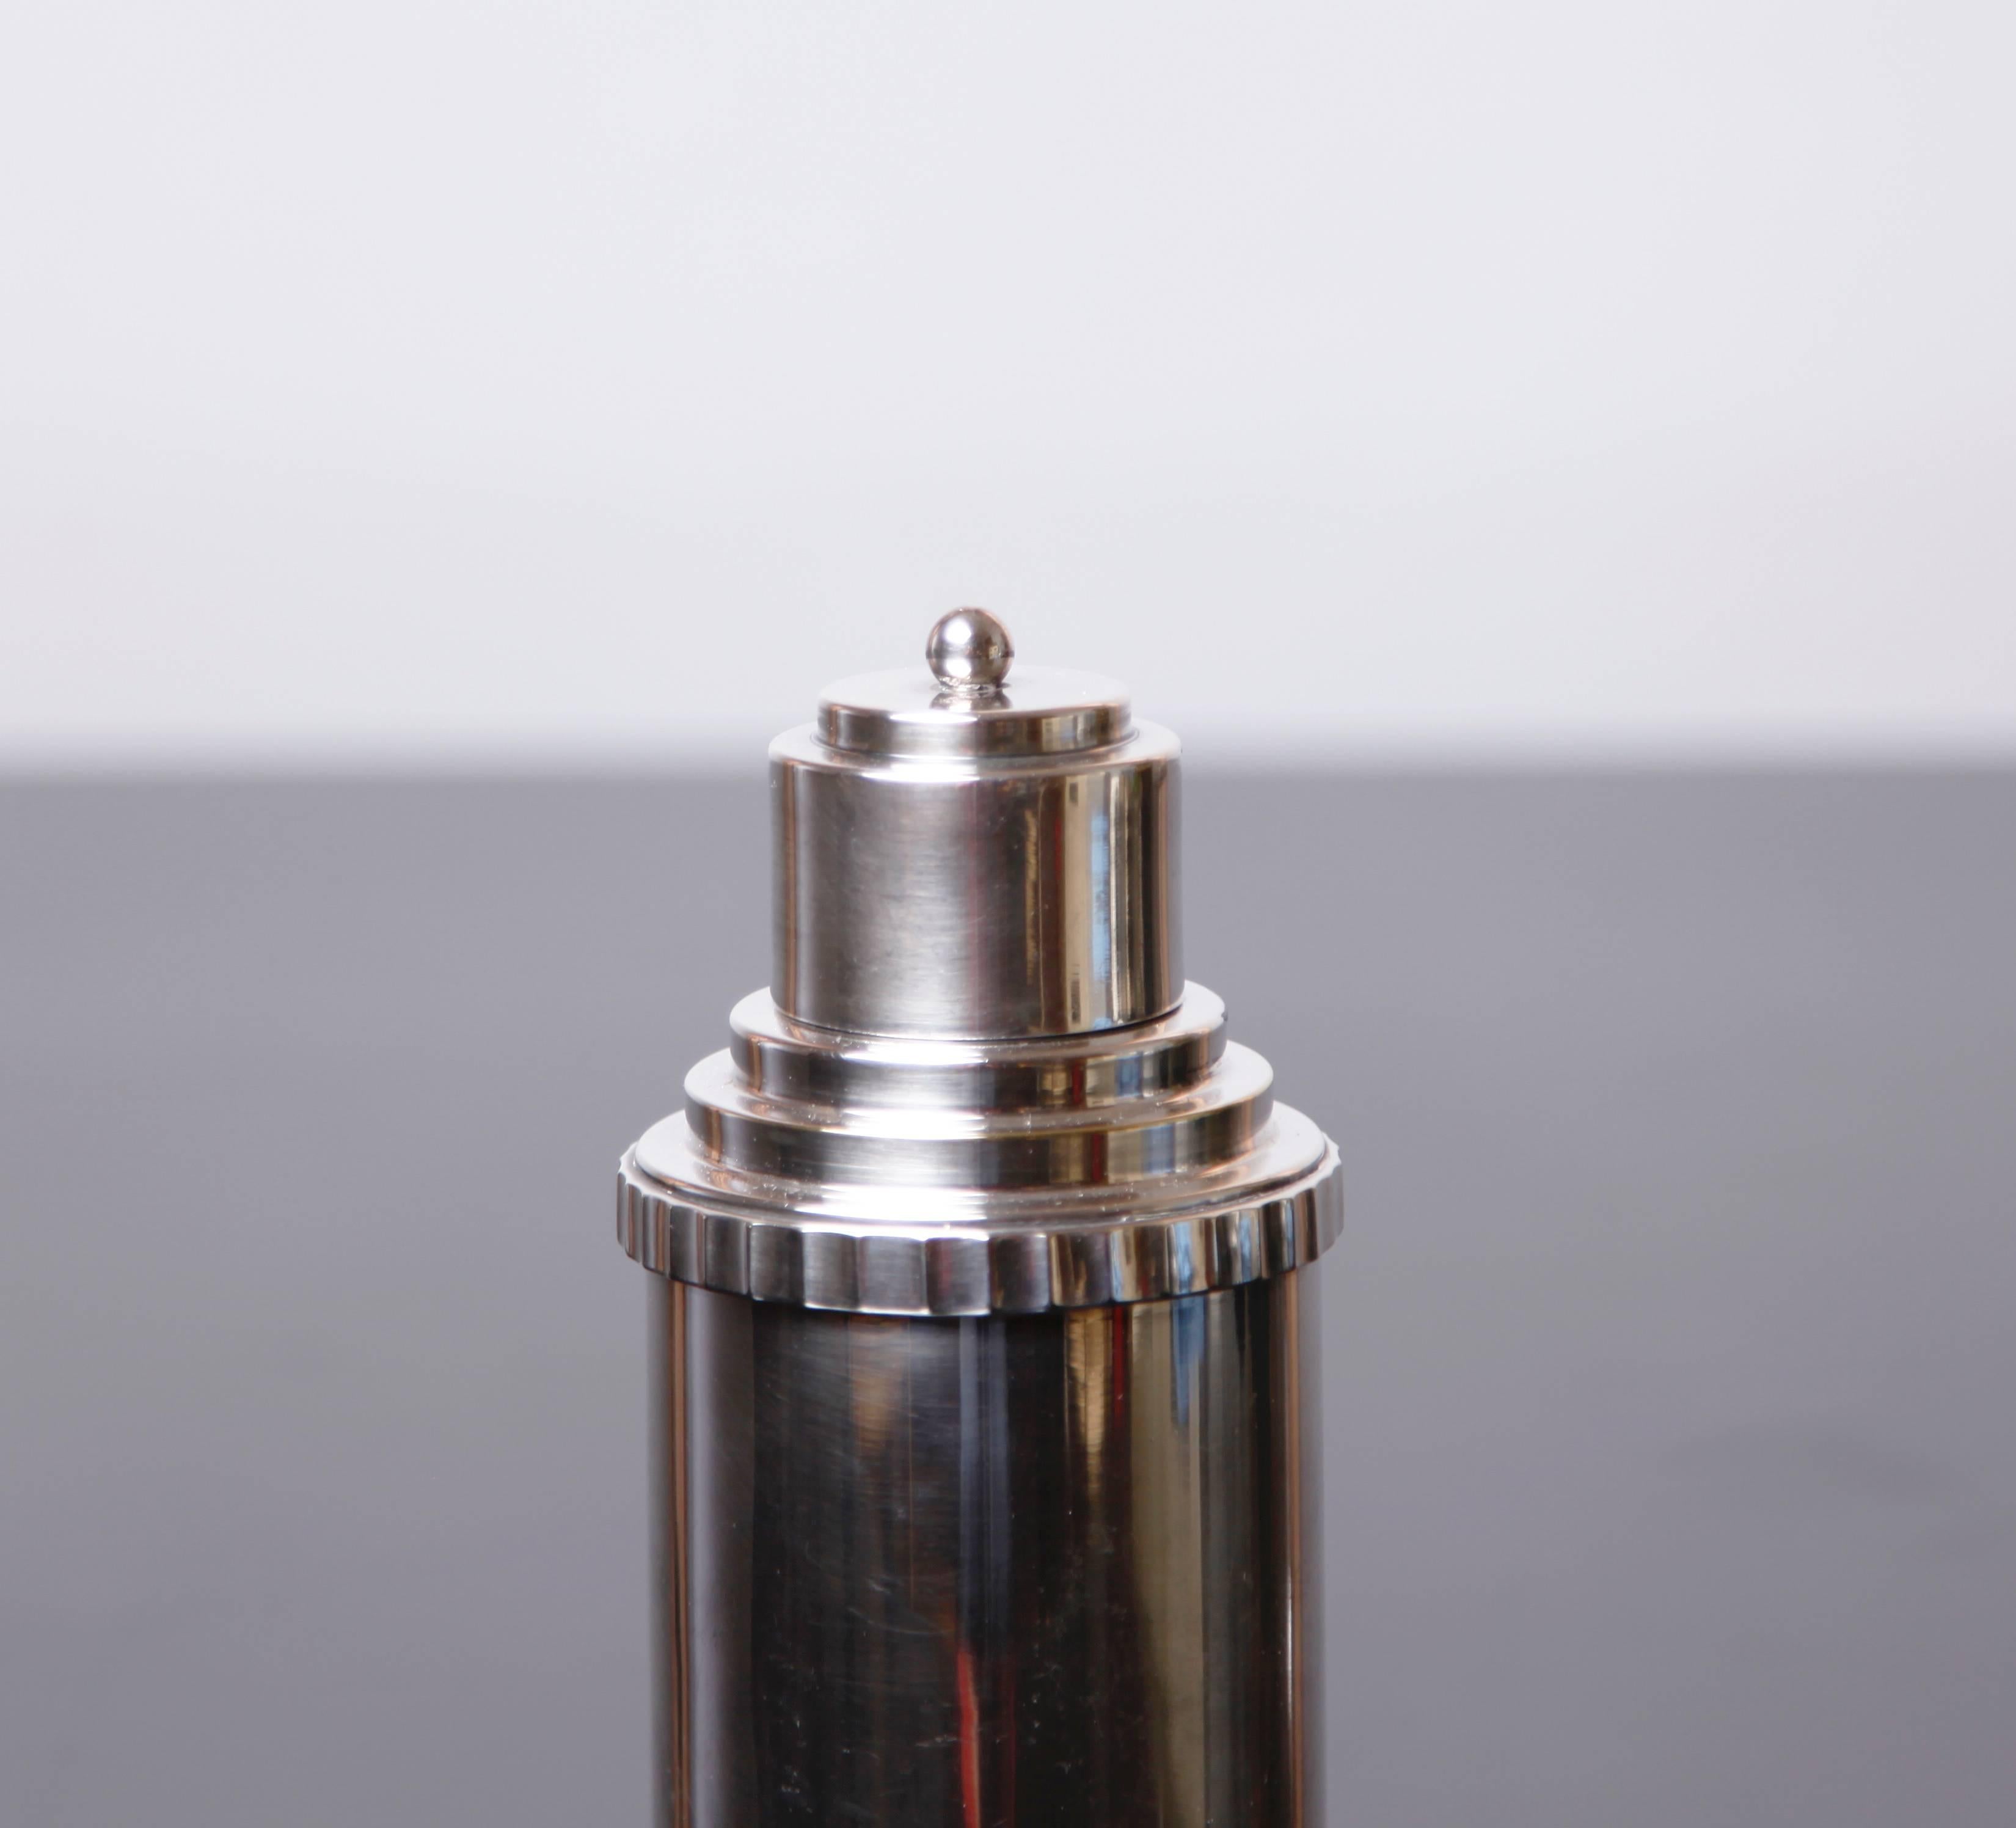 A silver plated cocktail shaker from the first quarter of the 20th century, with the same idealized Industrial glamour as the architecture of that period. 

In very good vintage condition, with one small dent on the side.